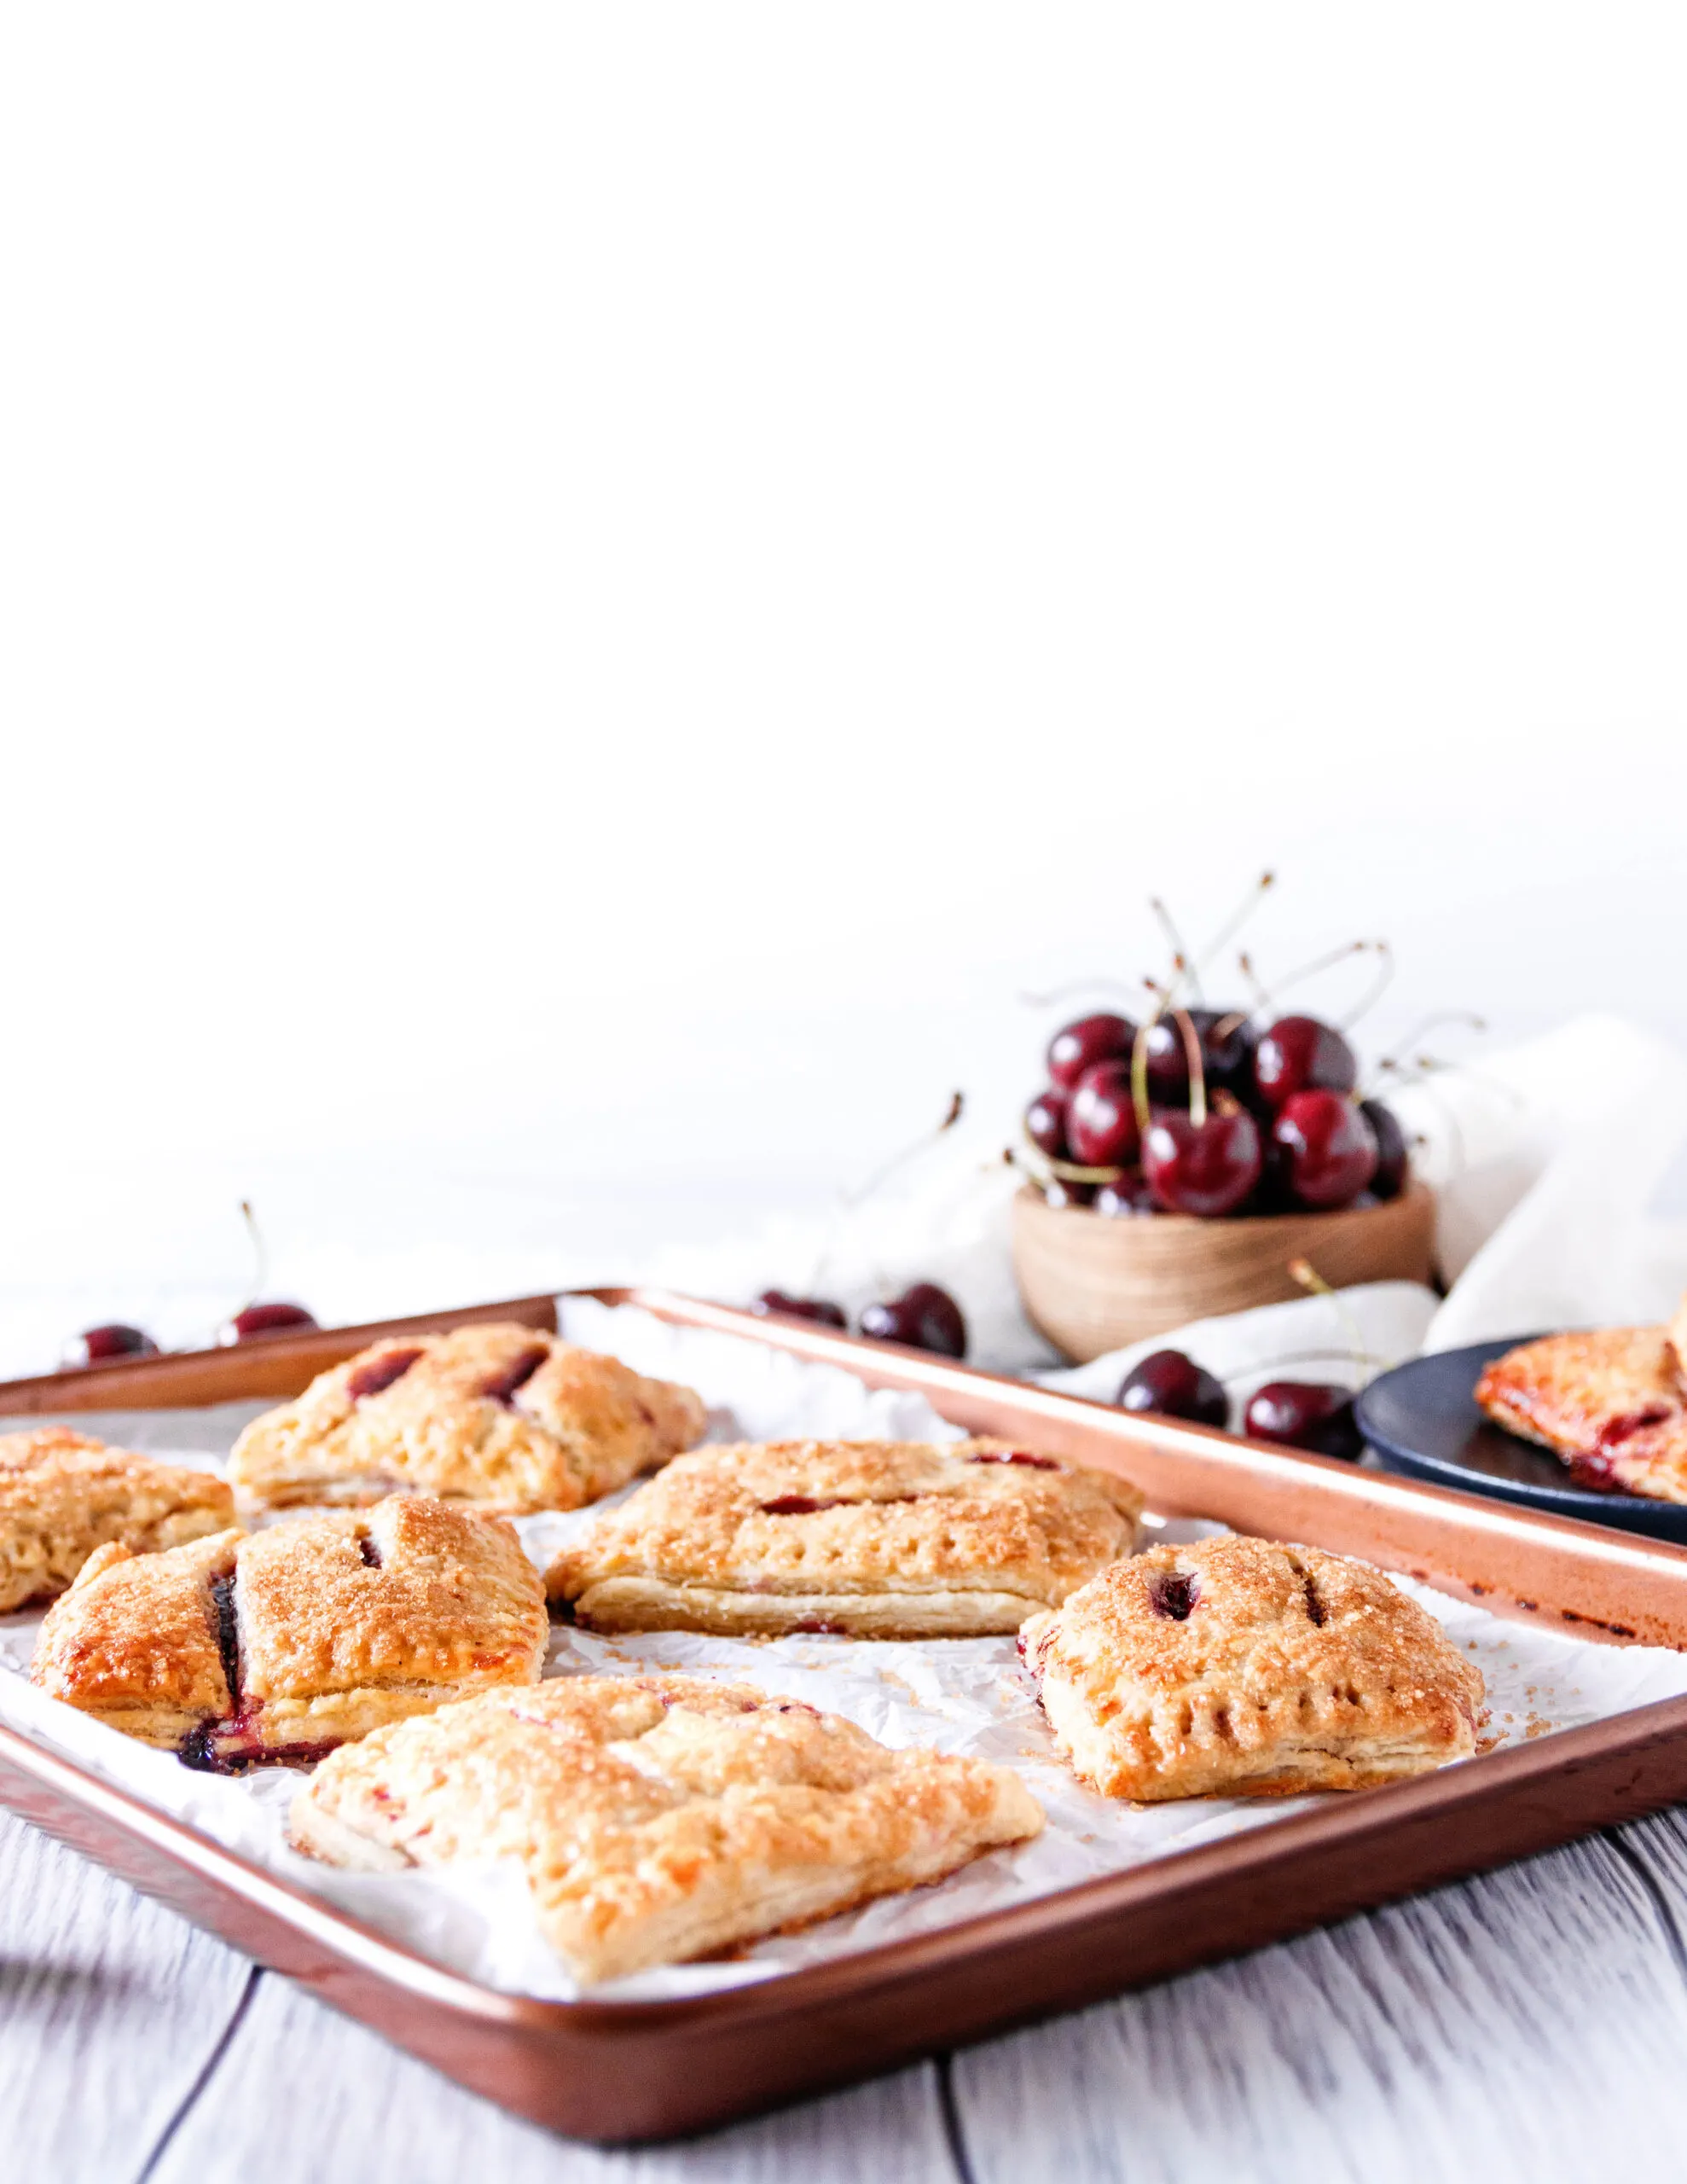 just-warm hand pies ready to grab and enjoy from the baking sheet